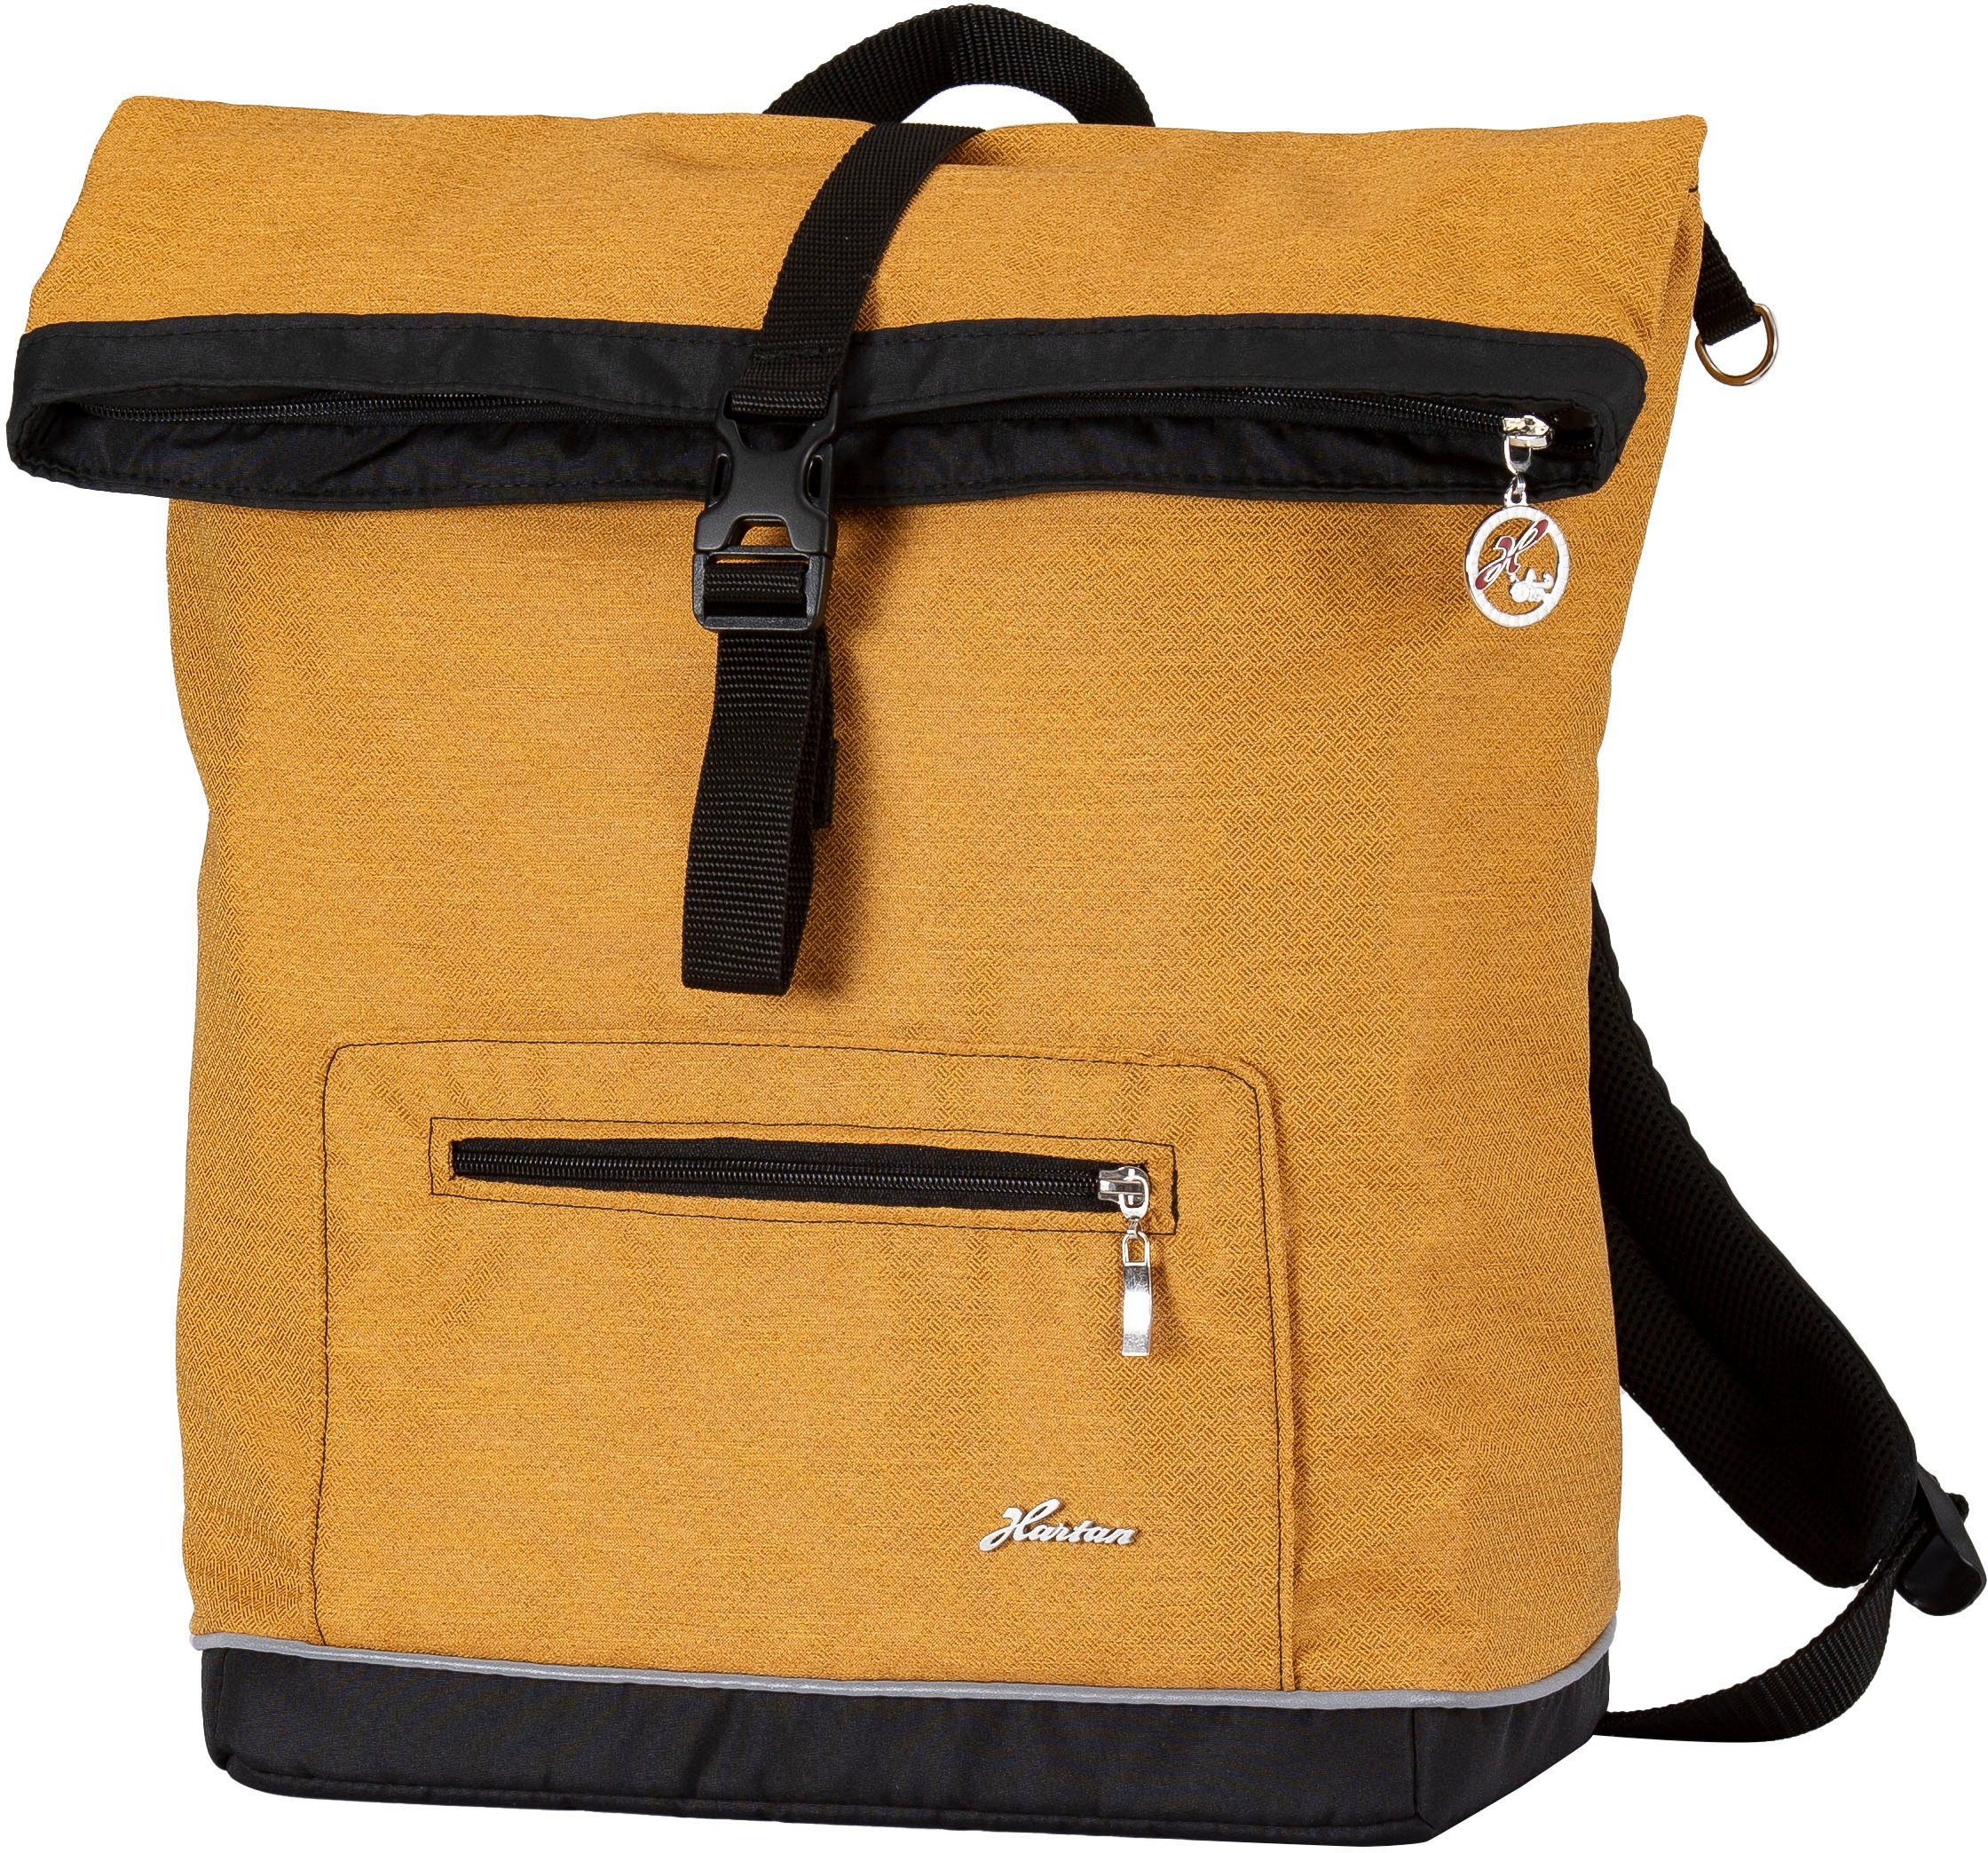 Hartan Wickelrucksack Space bag - Casual Collection, mit Thermofach; Made in Germany